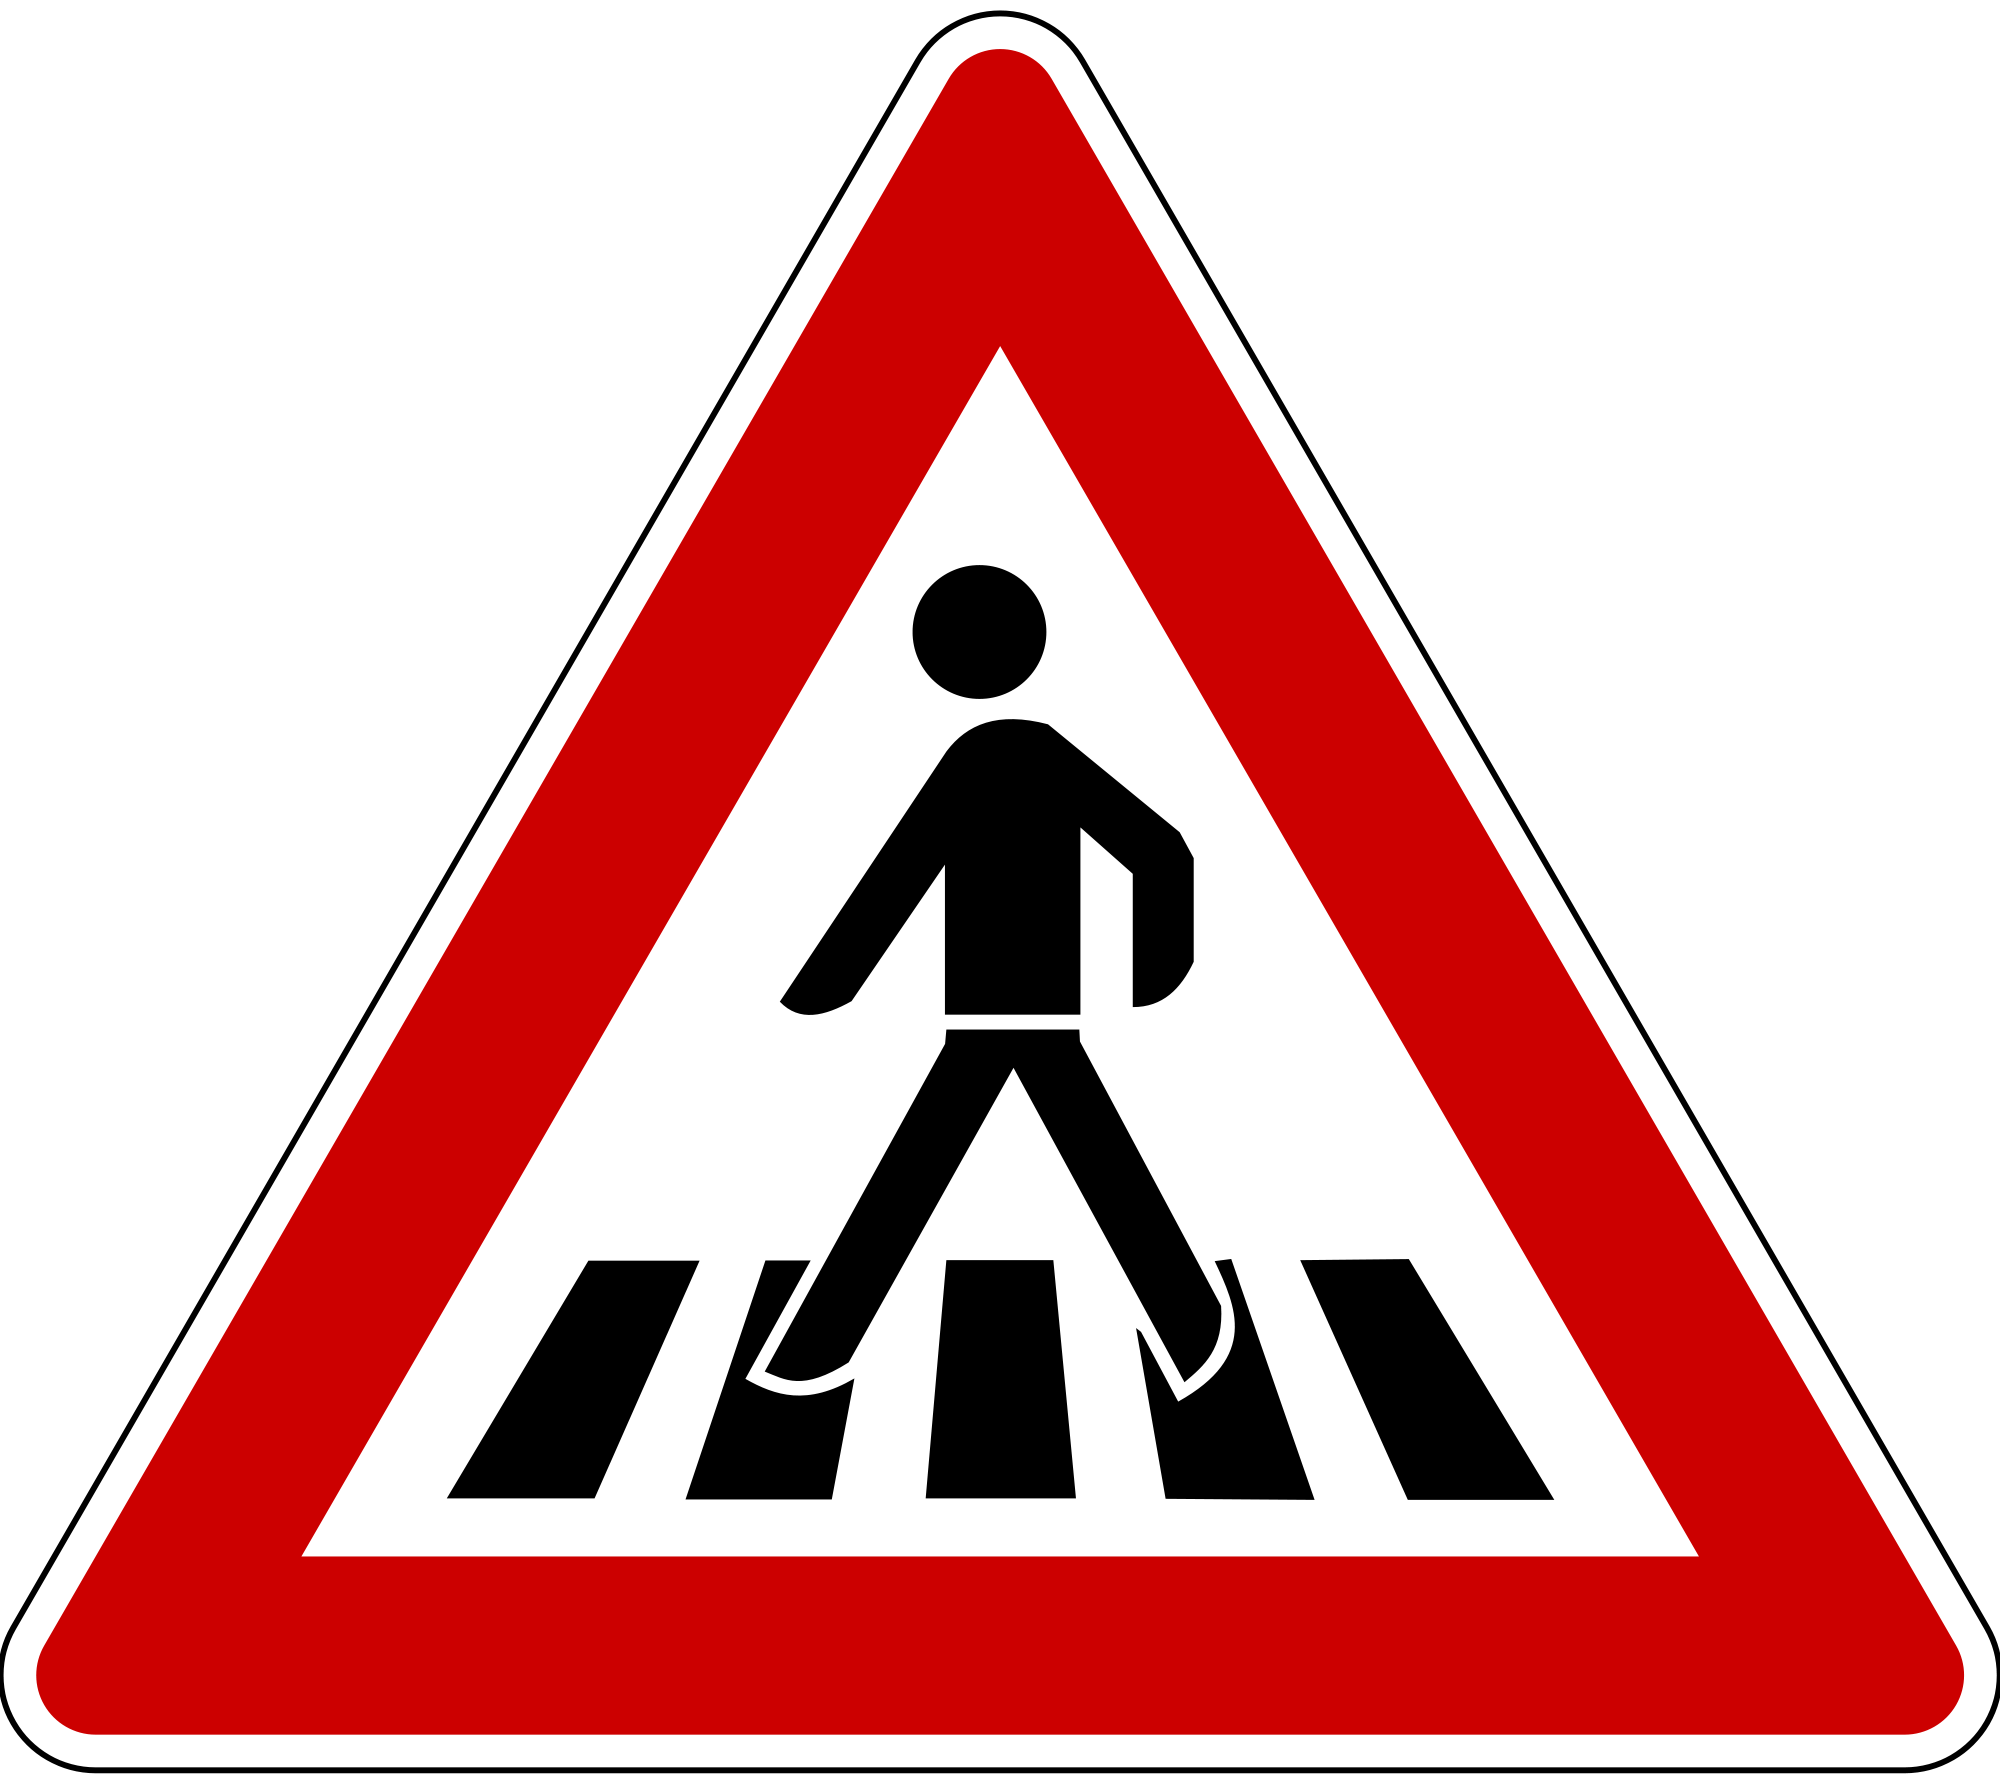 Pedestrian crossing, road sign on a white background free image download